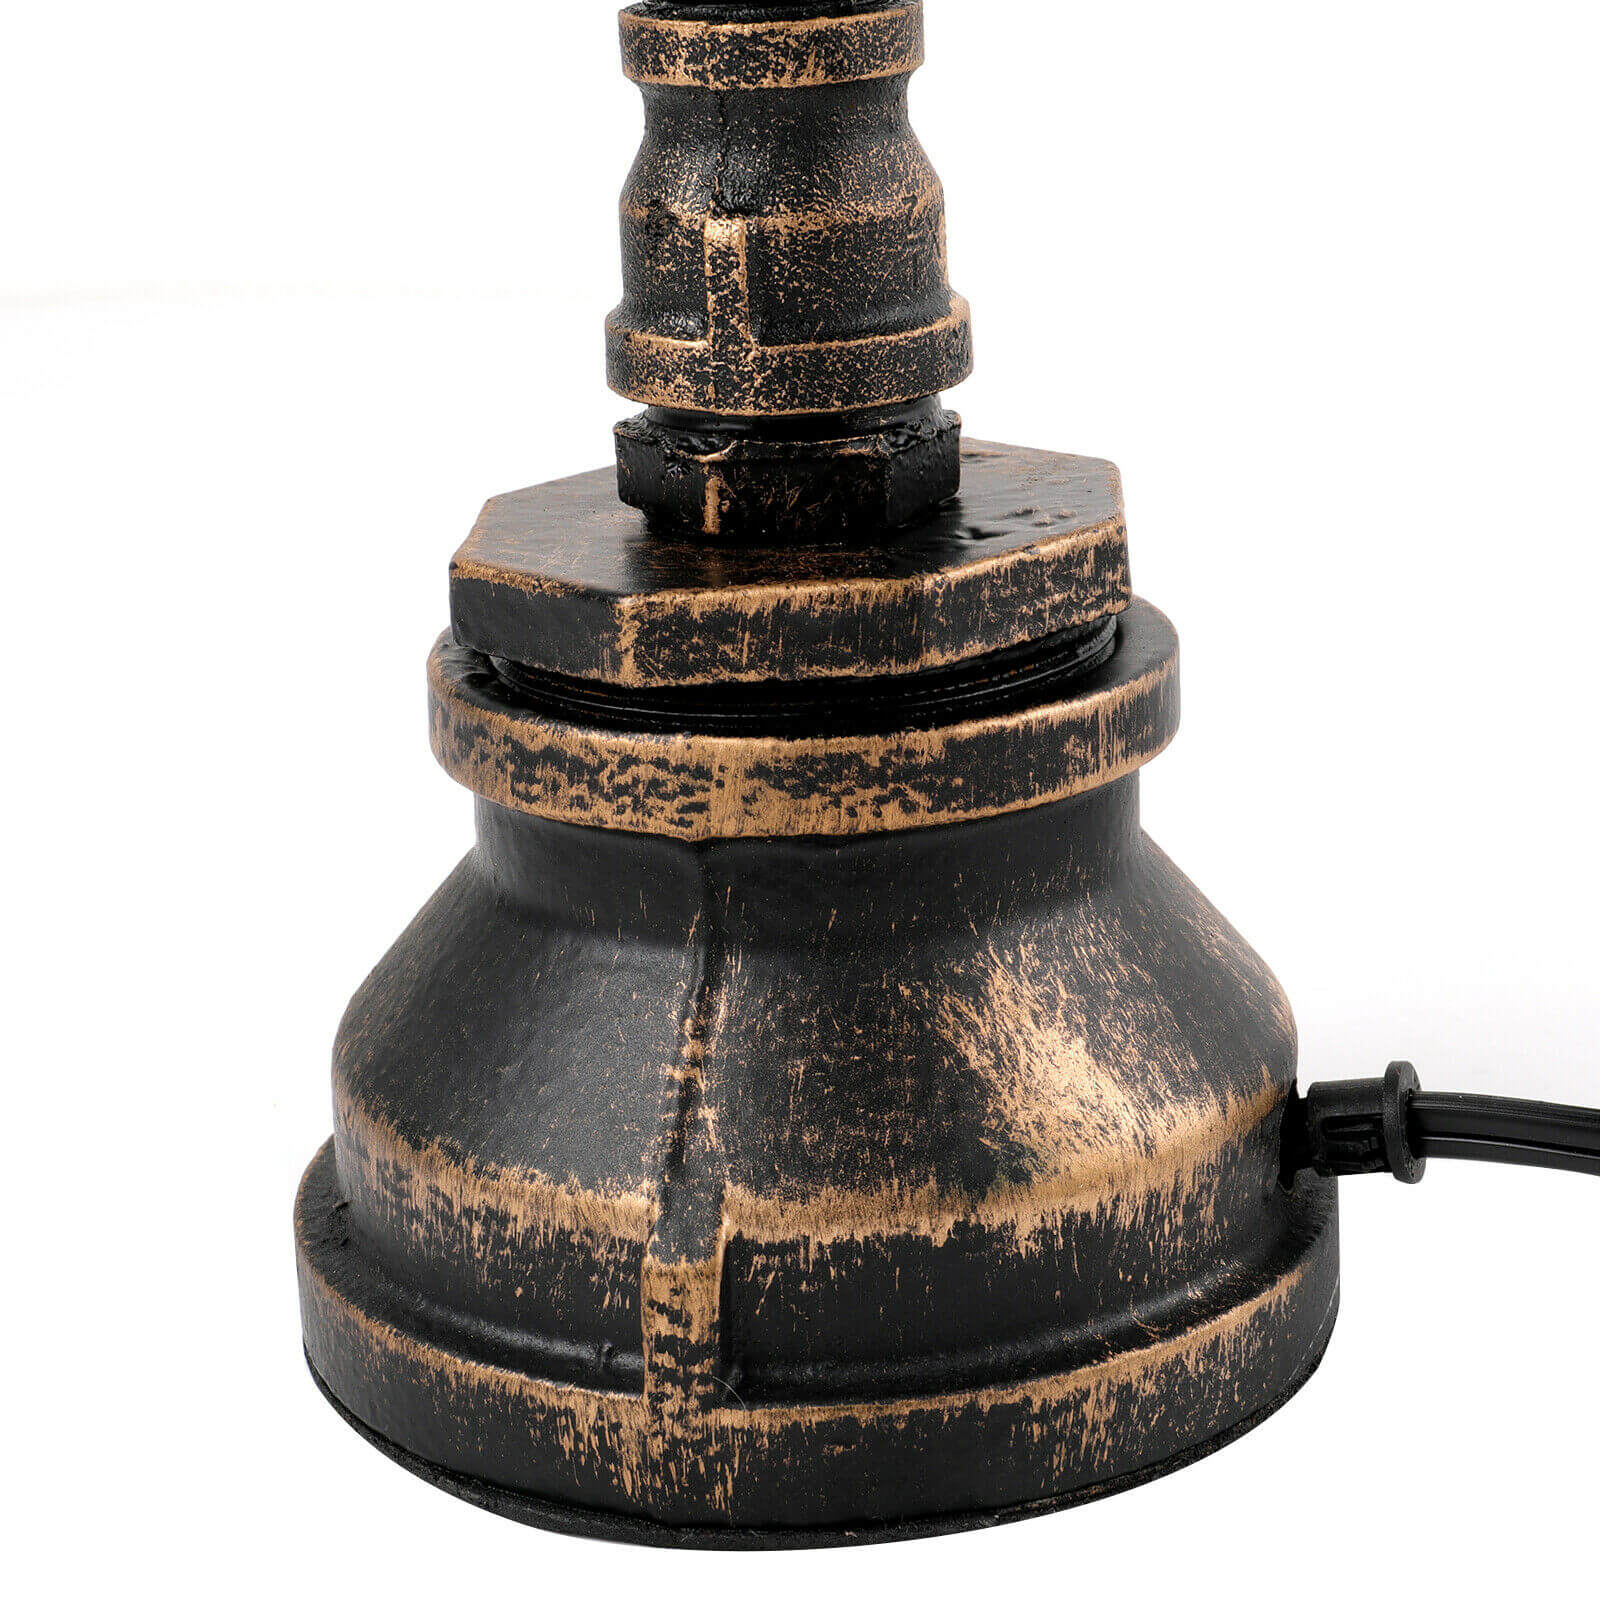 Steampunk Industrial Table Lamp bottom detail